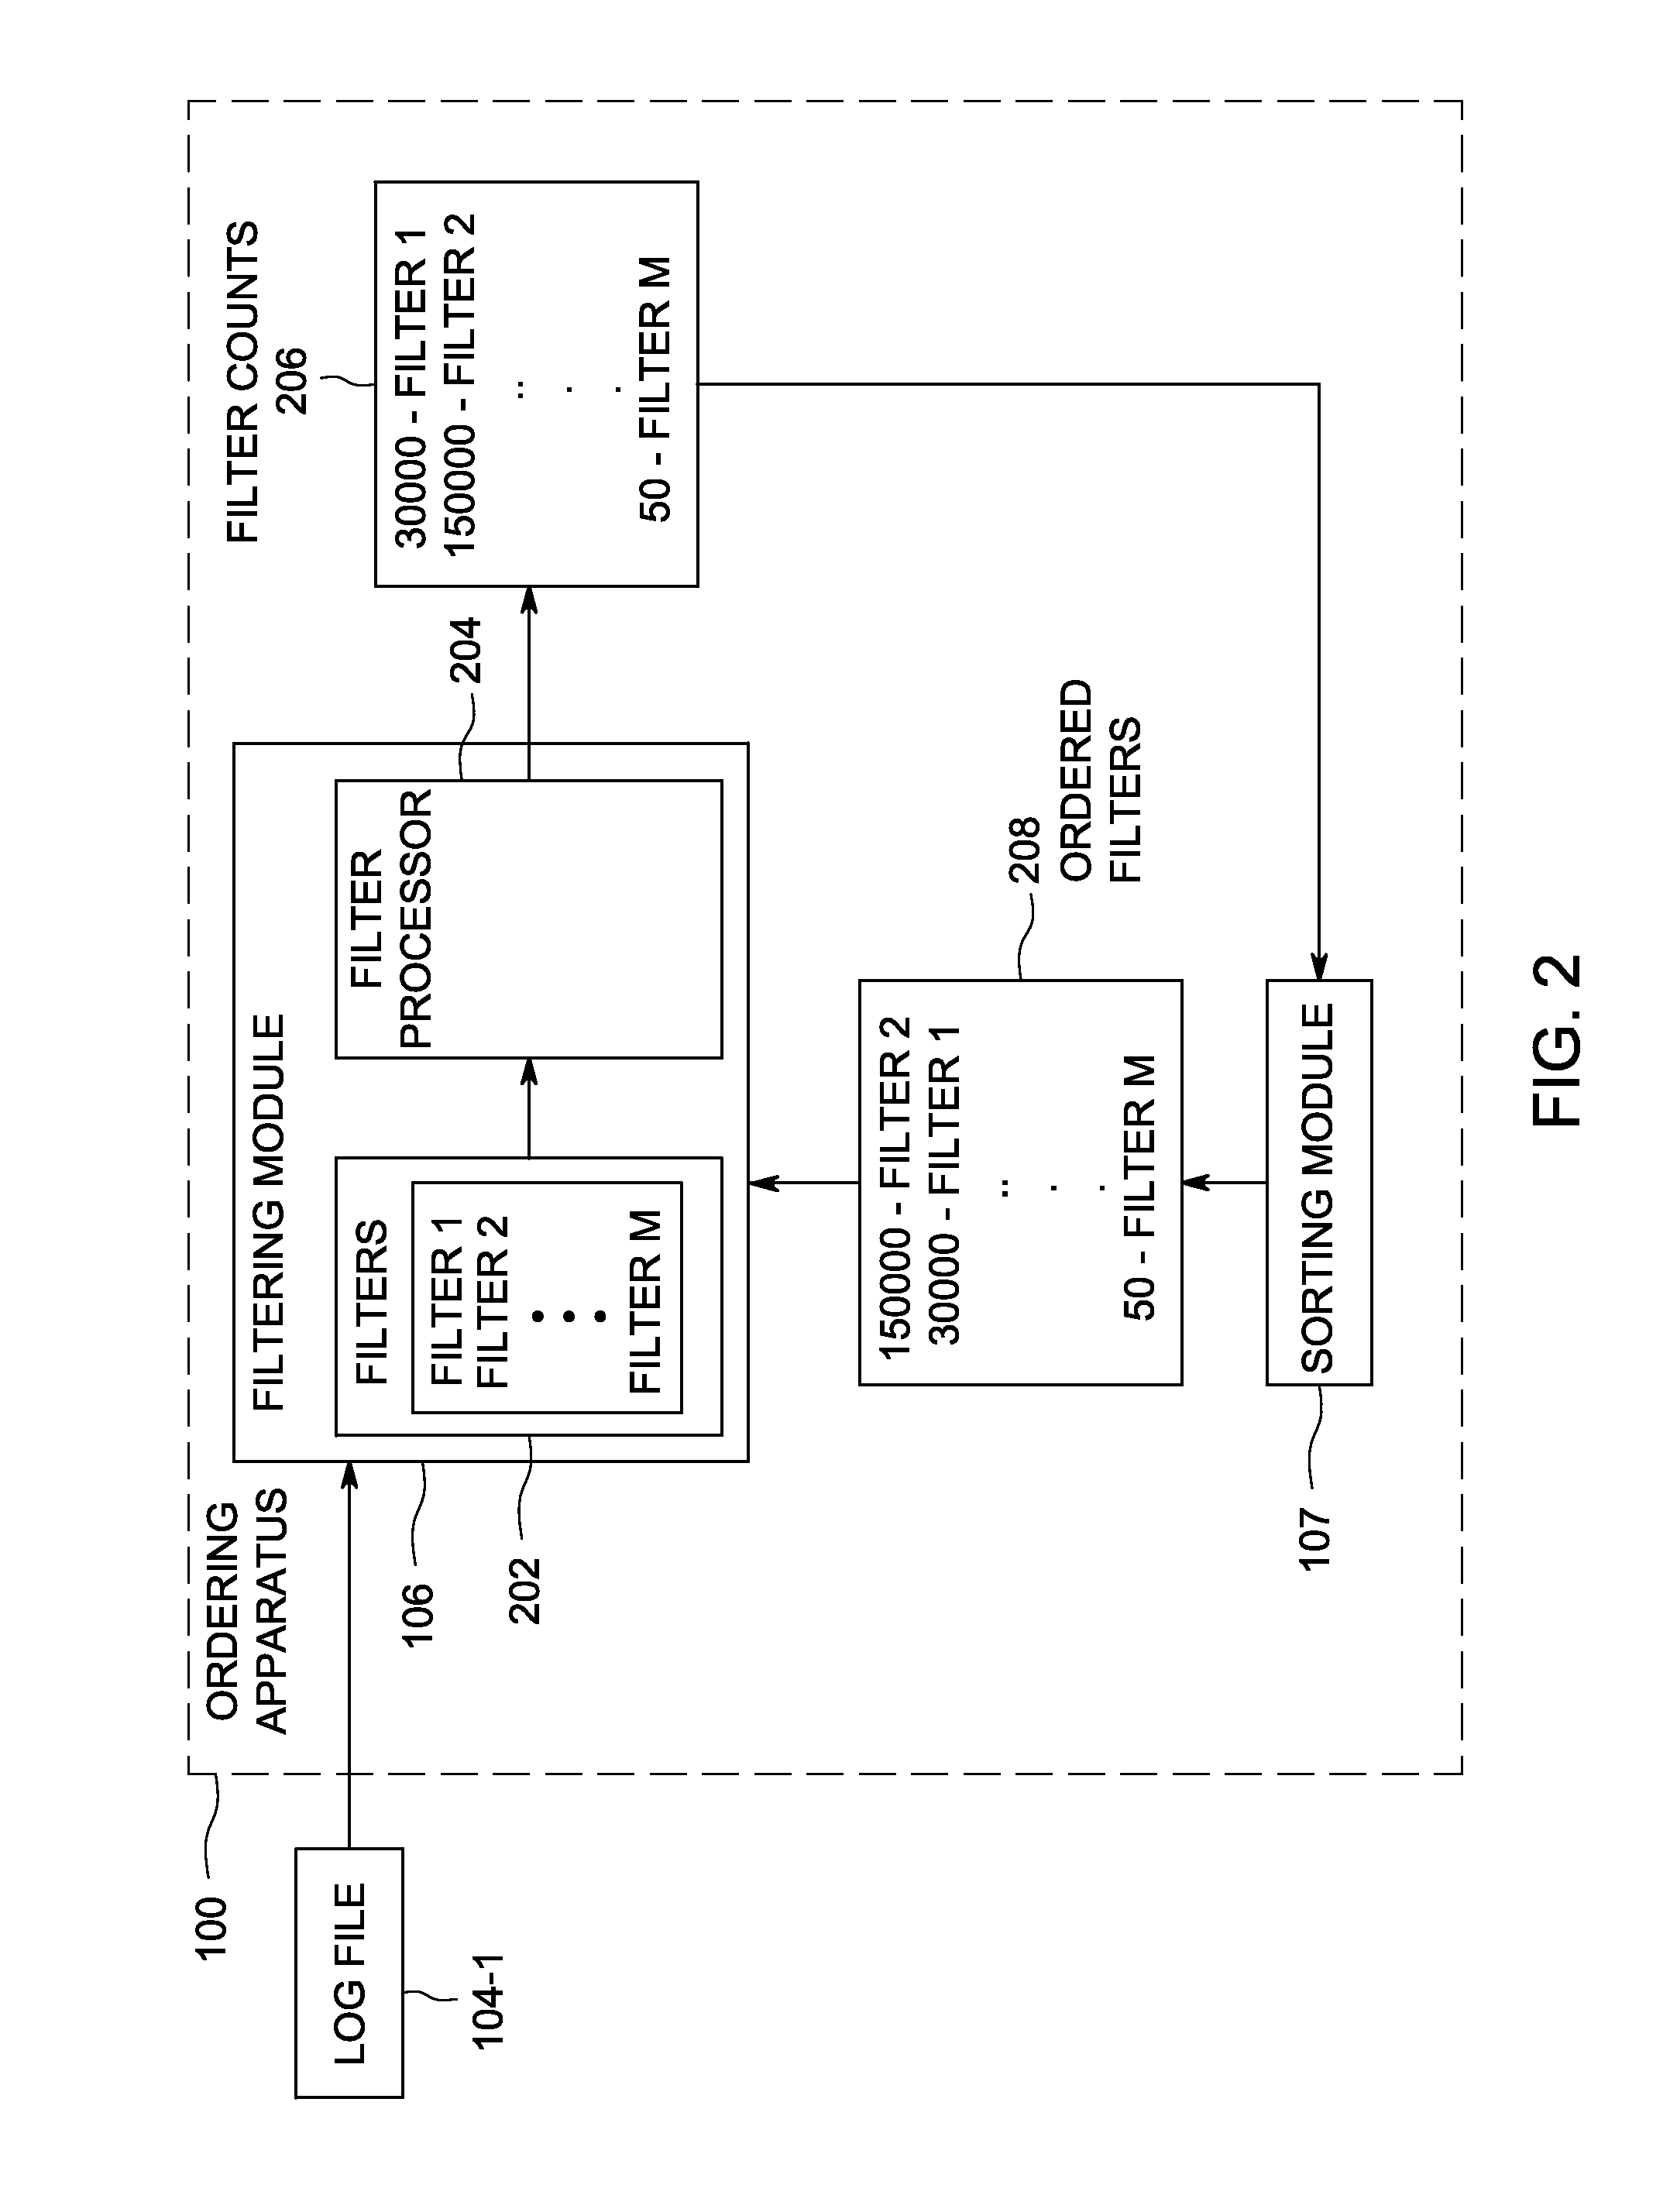 Method and apparatus for optimizing log file filtering